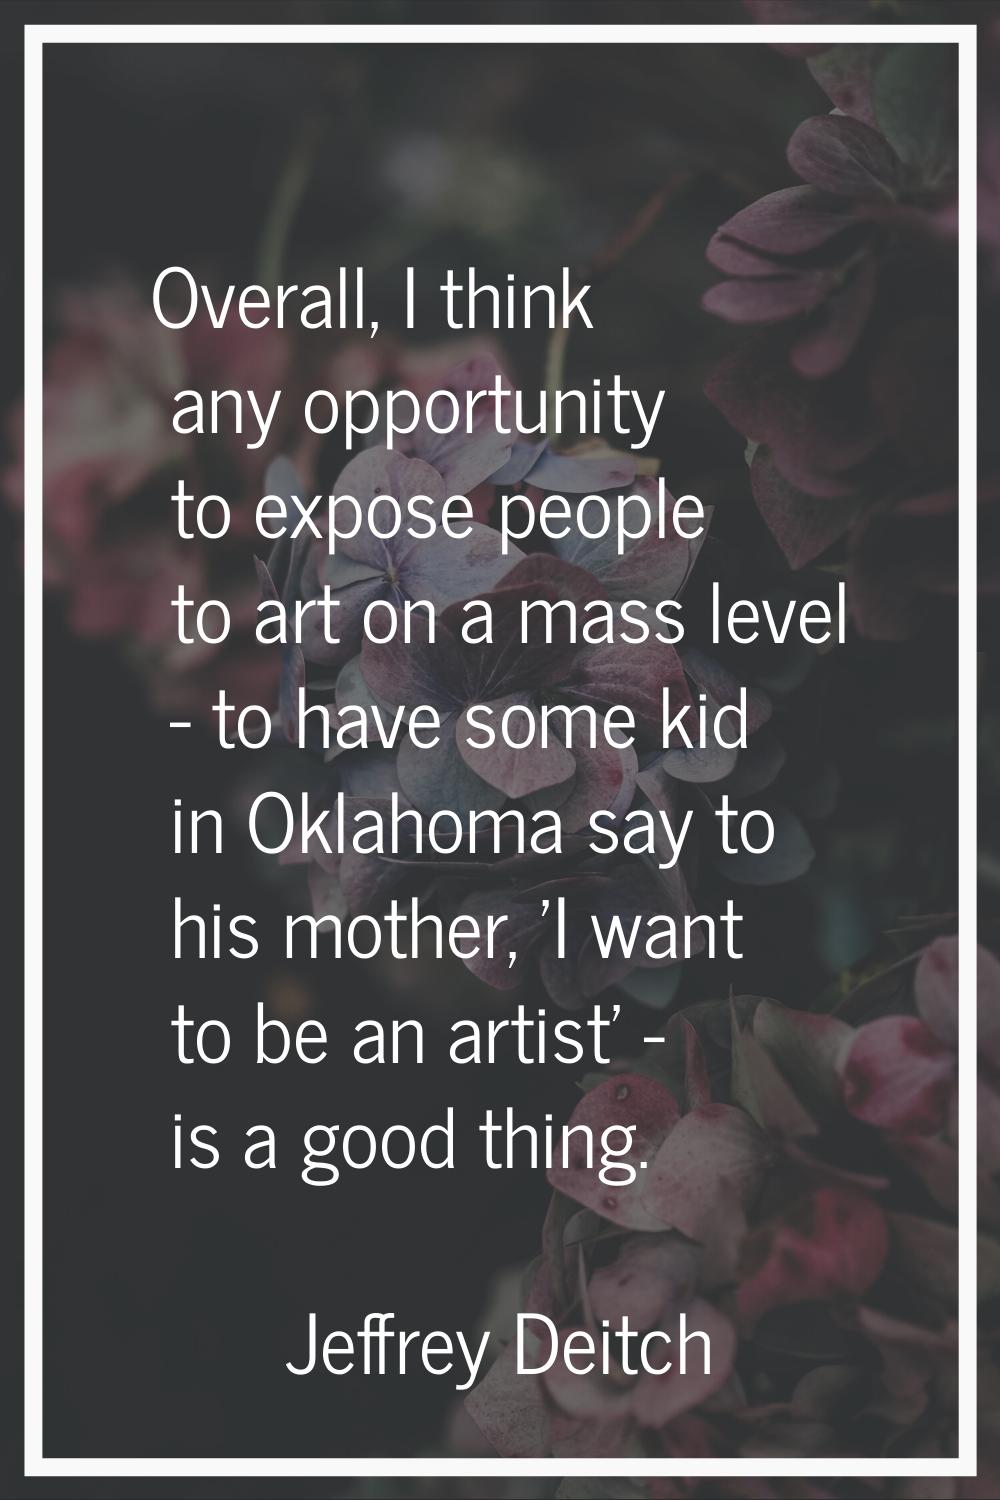 Overall, I think any opportunity to expose people to art on a mass level - to have some kid in Okla